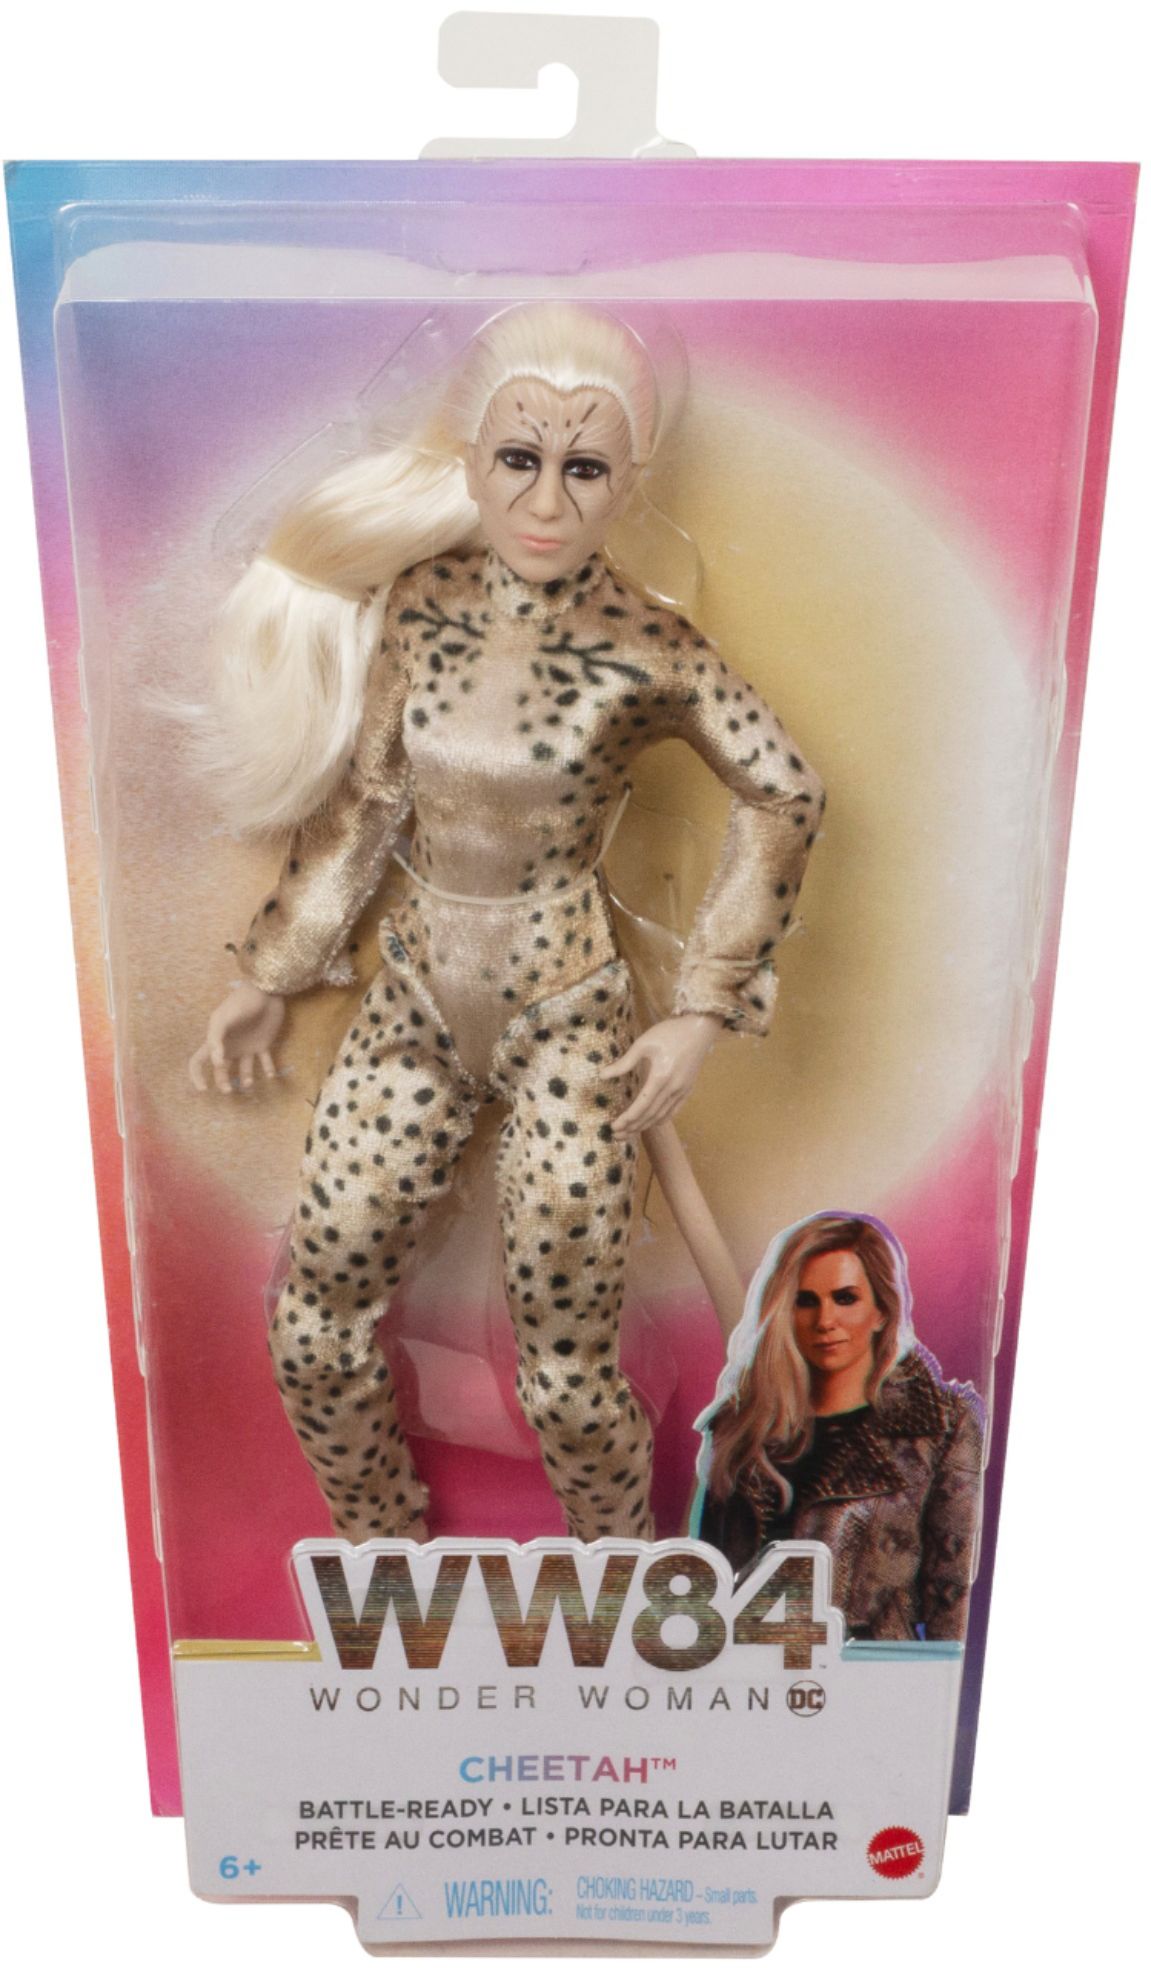 GKH98 Mattel WW84 Cheetah Doll Action Figure for sale online